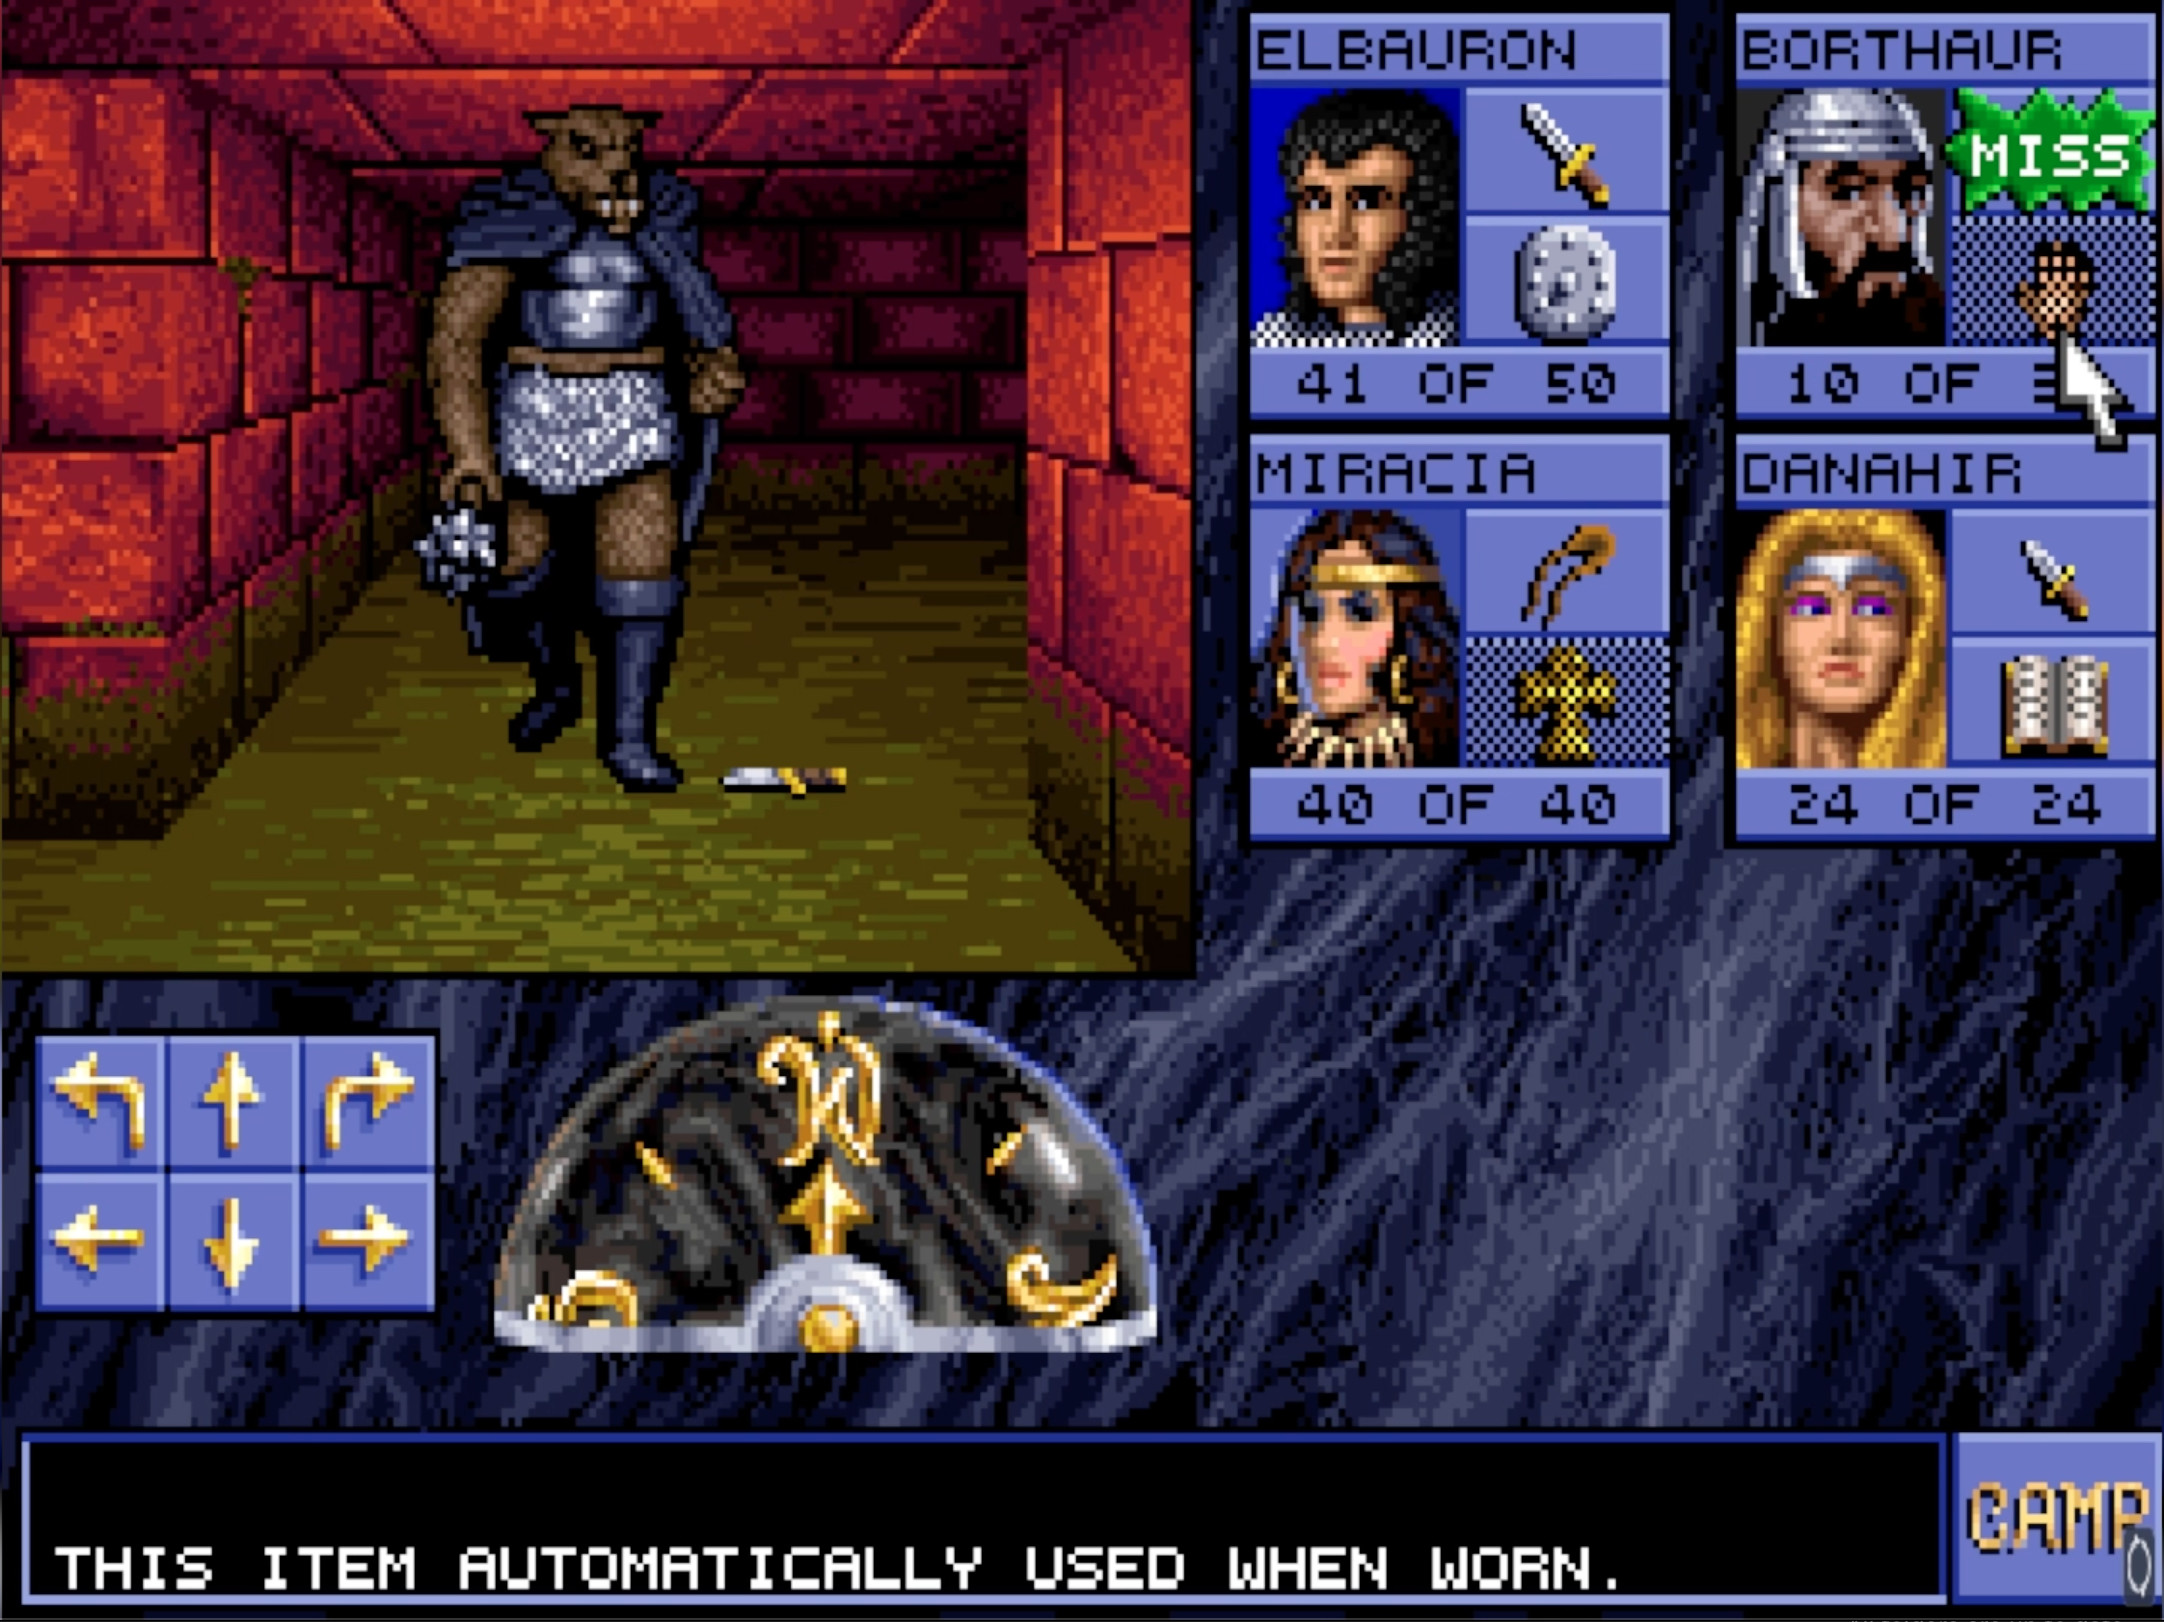 In Eye of the Beholder, an enemy wolfman emerges from a red-bricked corridor.